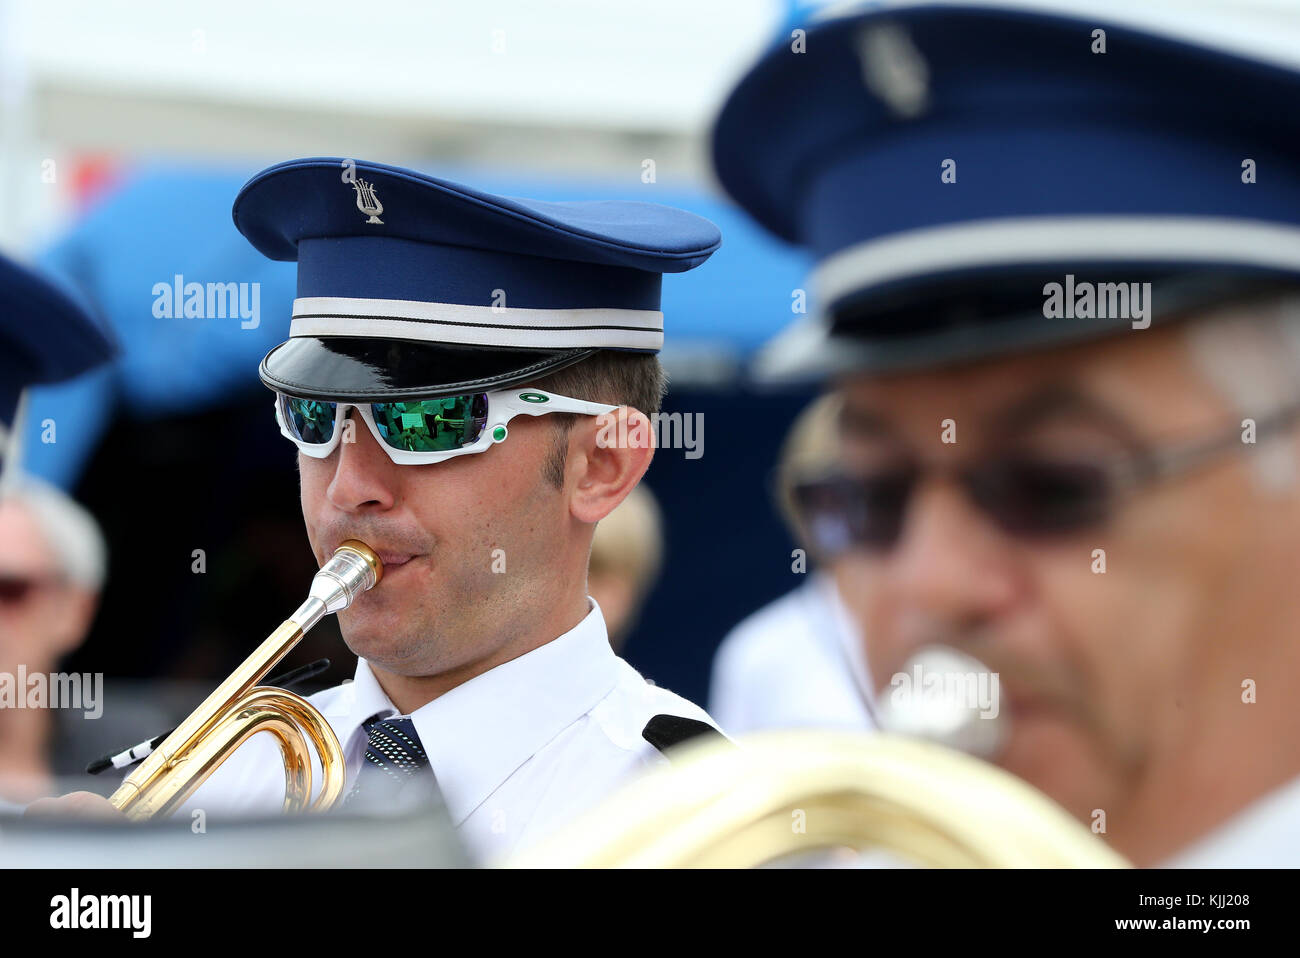 Marching Band. Frankreich. Stockfoto